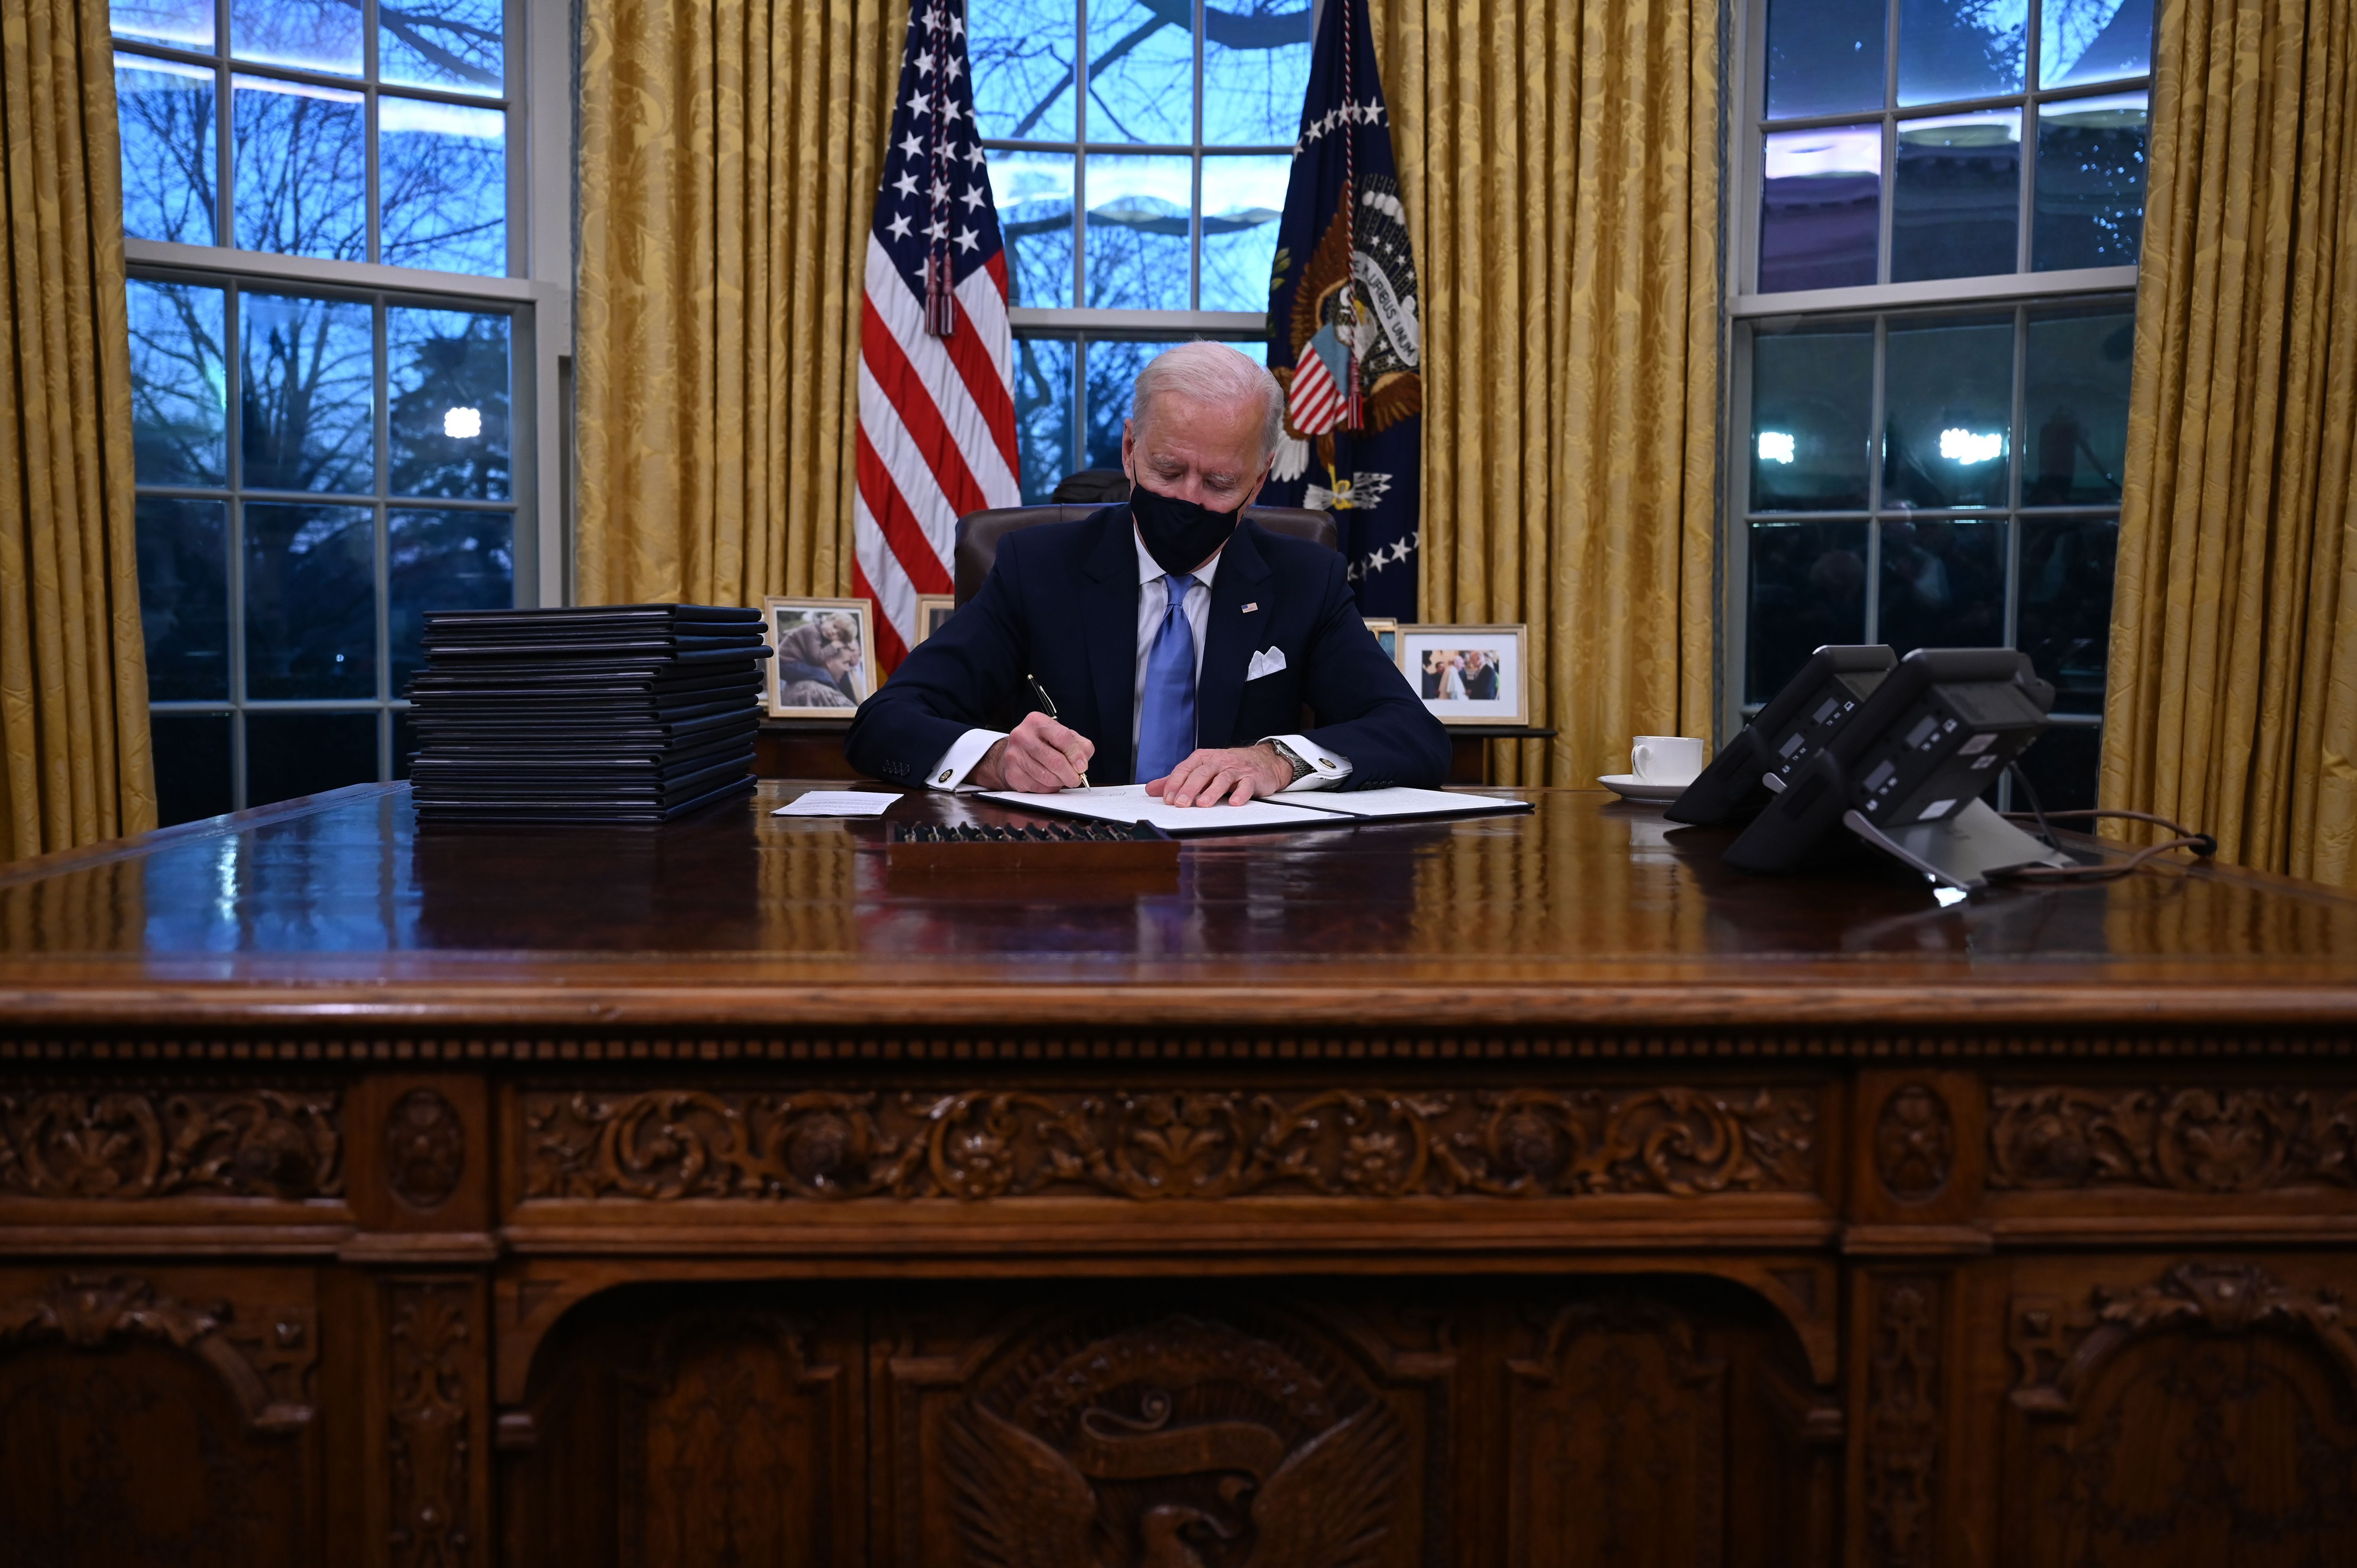 Photo of Joe Biden signing an executive order in the Oval Office